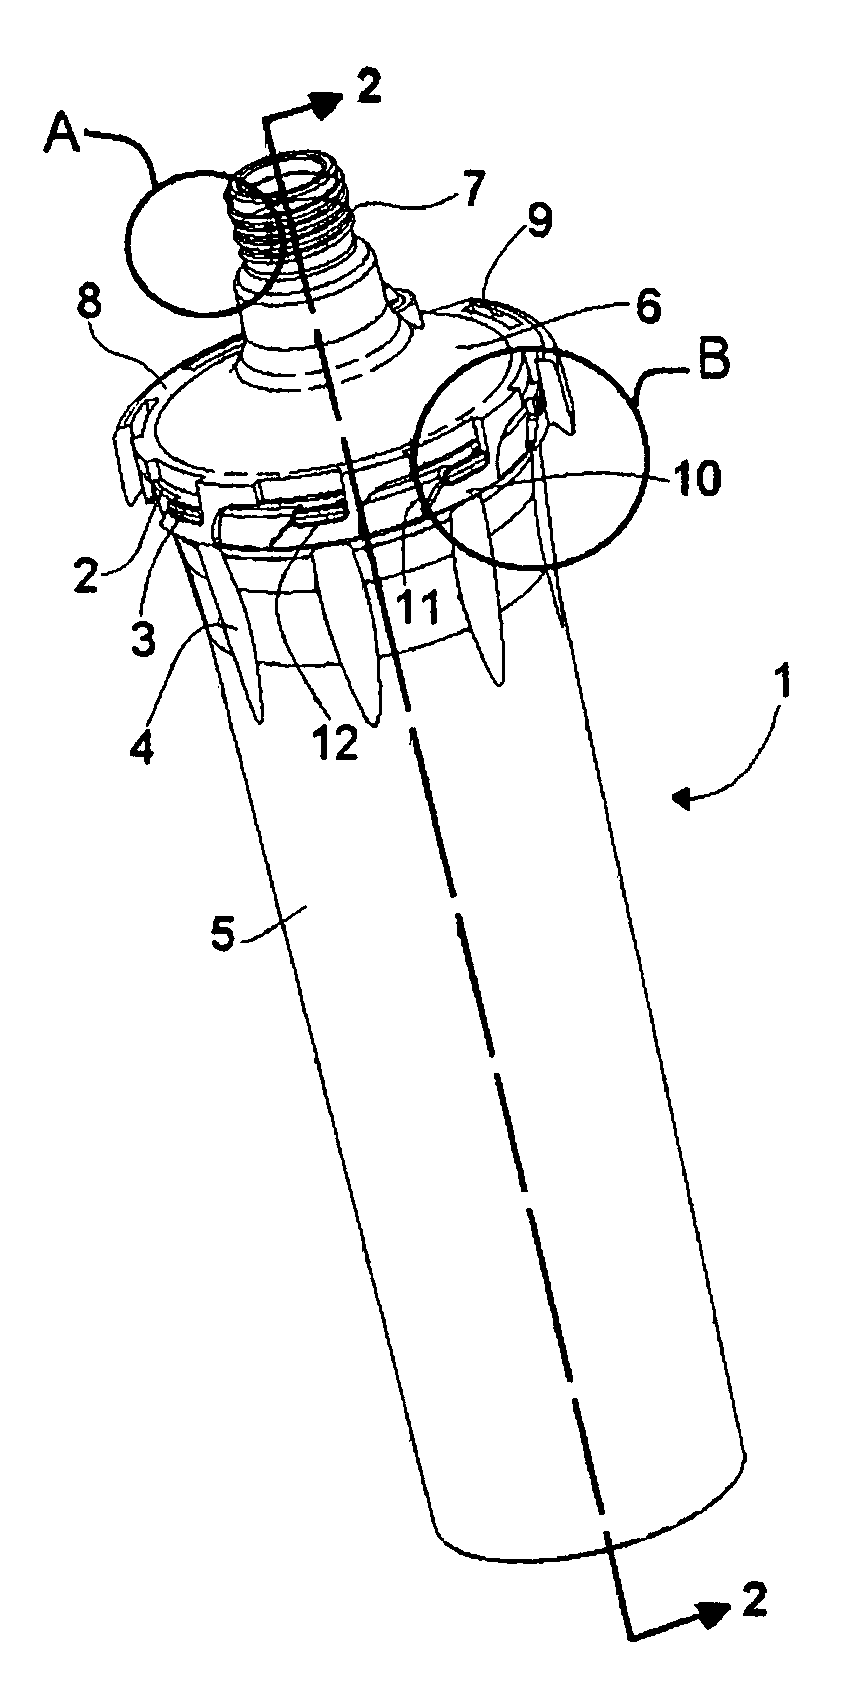 Water bottle system for use in a dental operatory